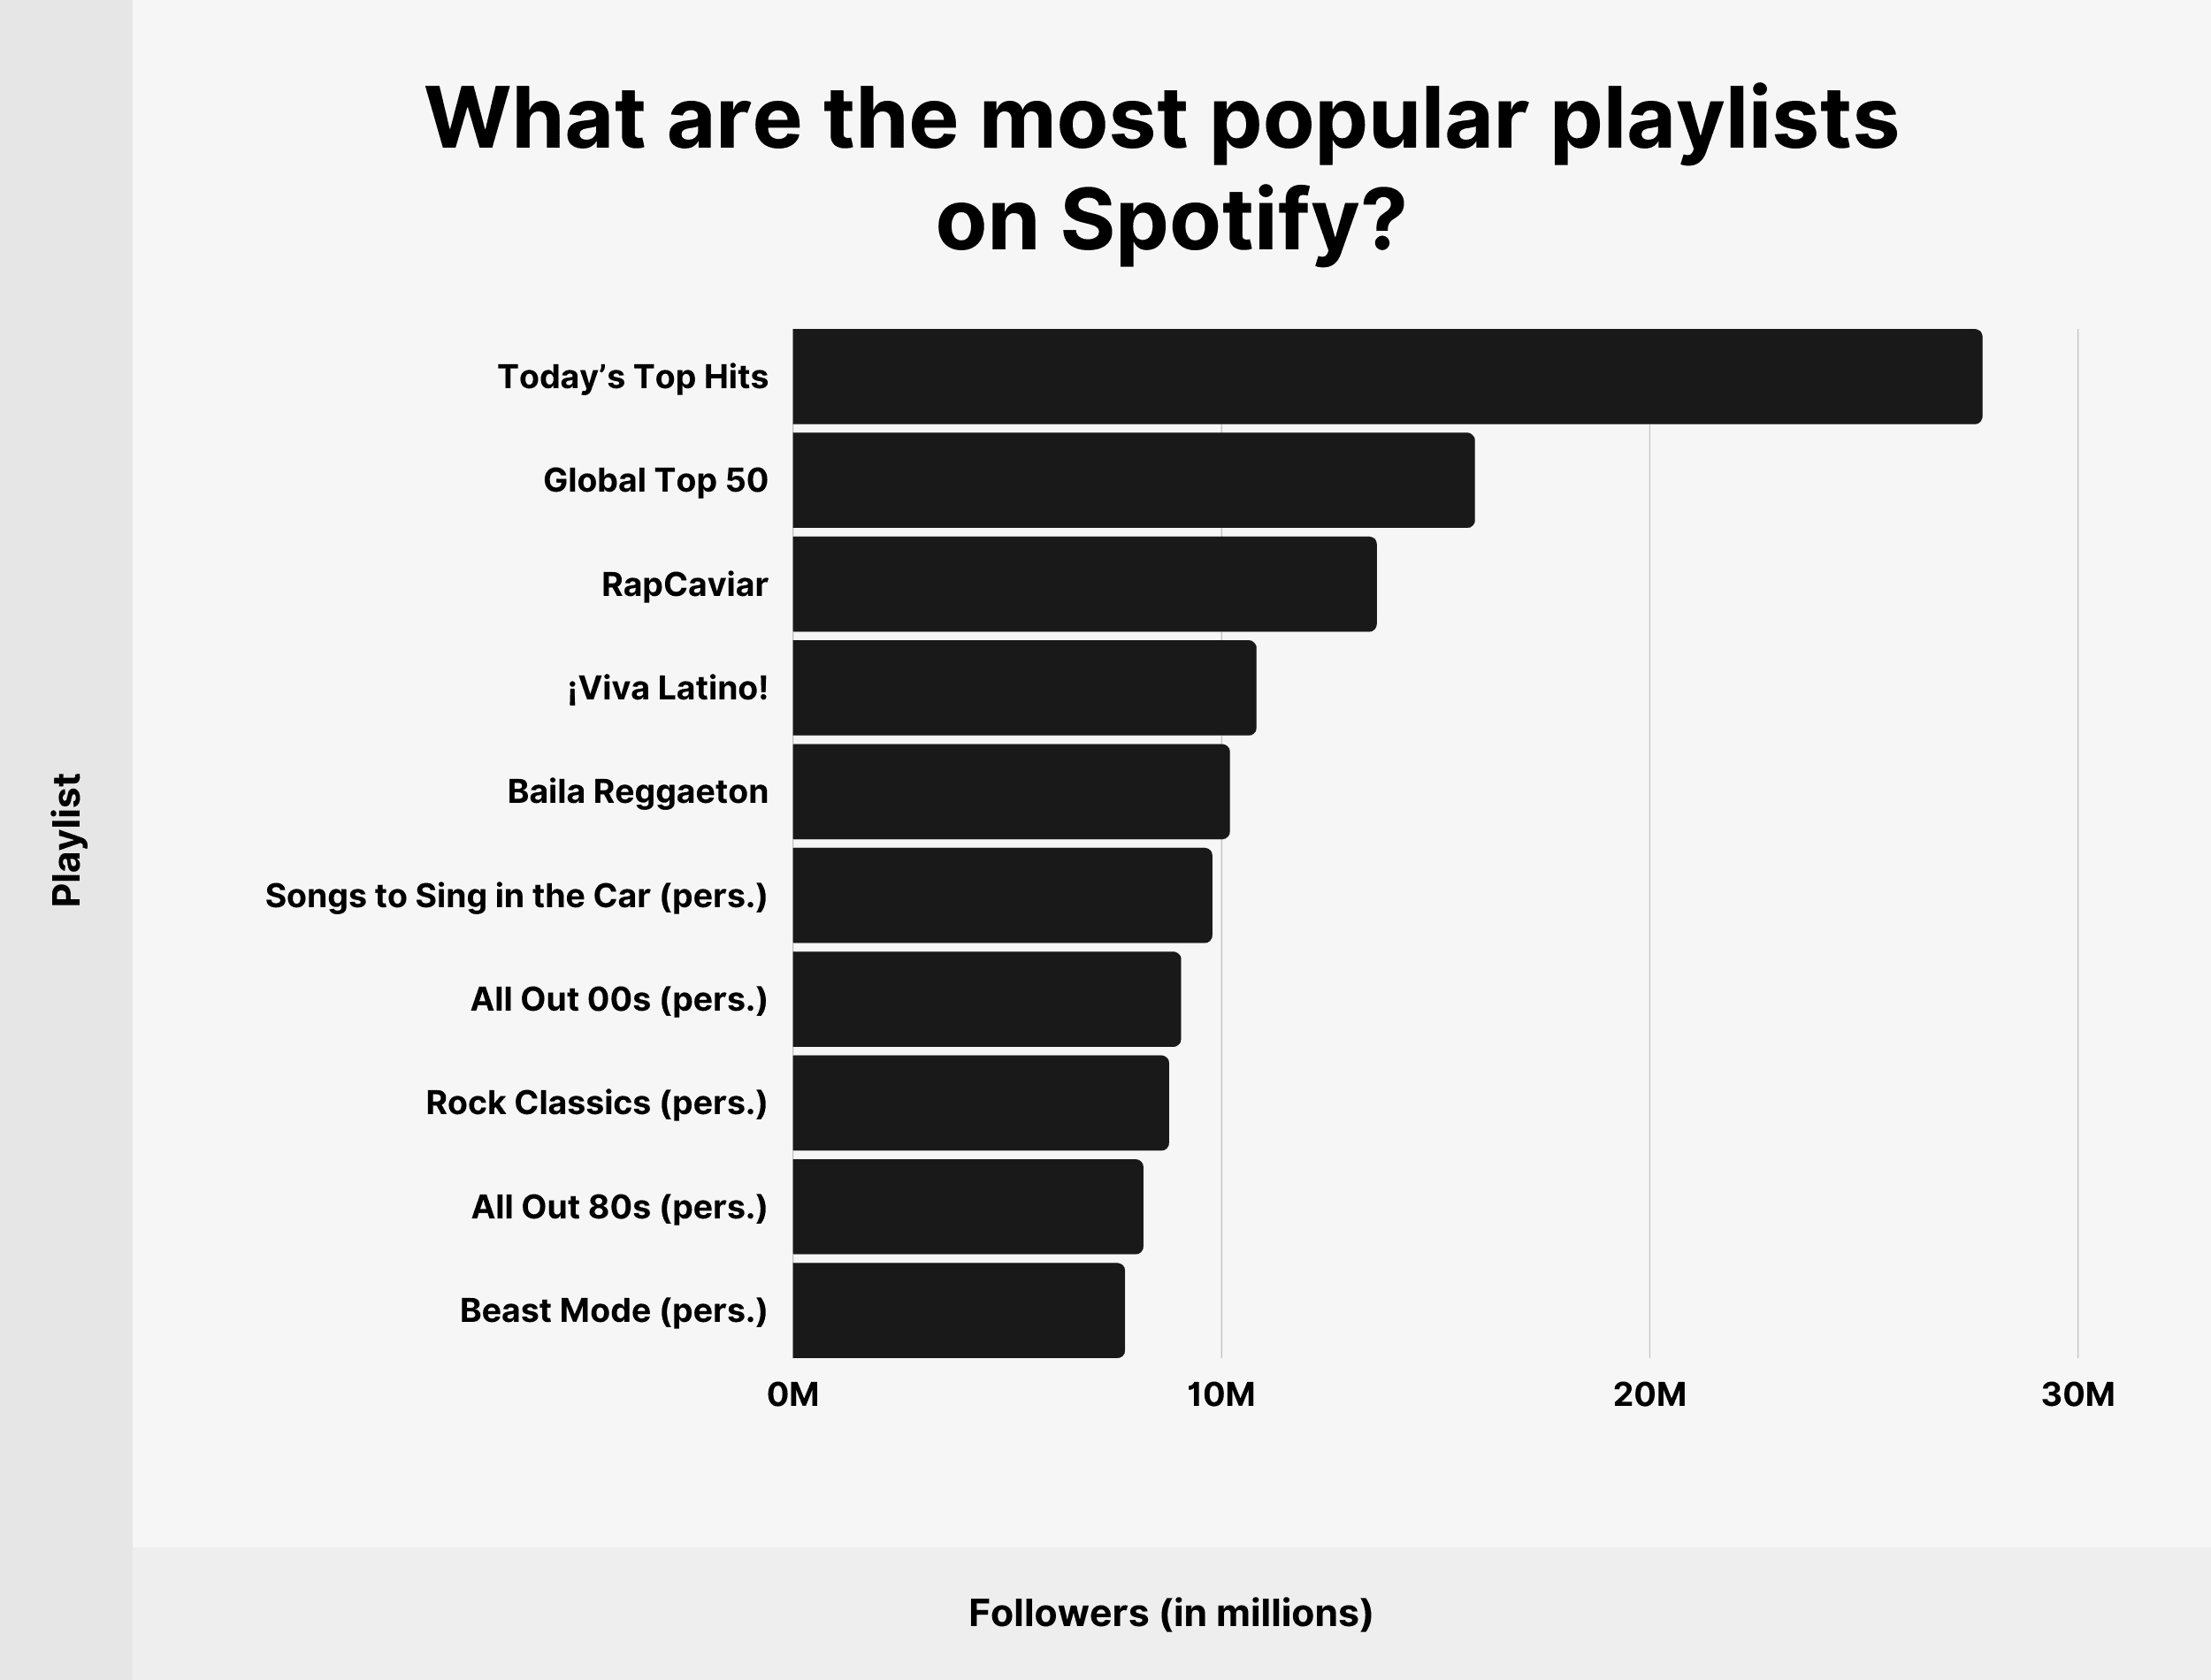 What are the most popular playlists on Spotify?